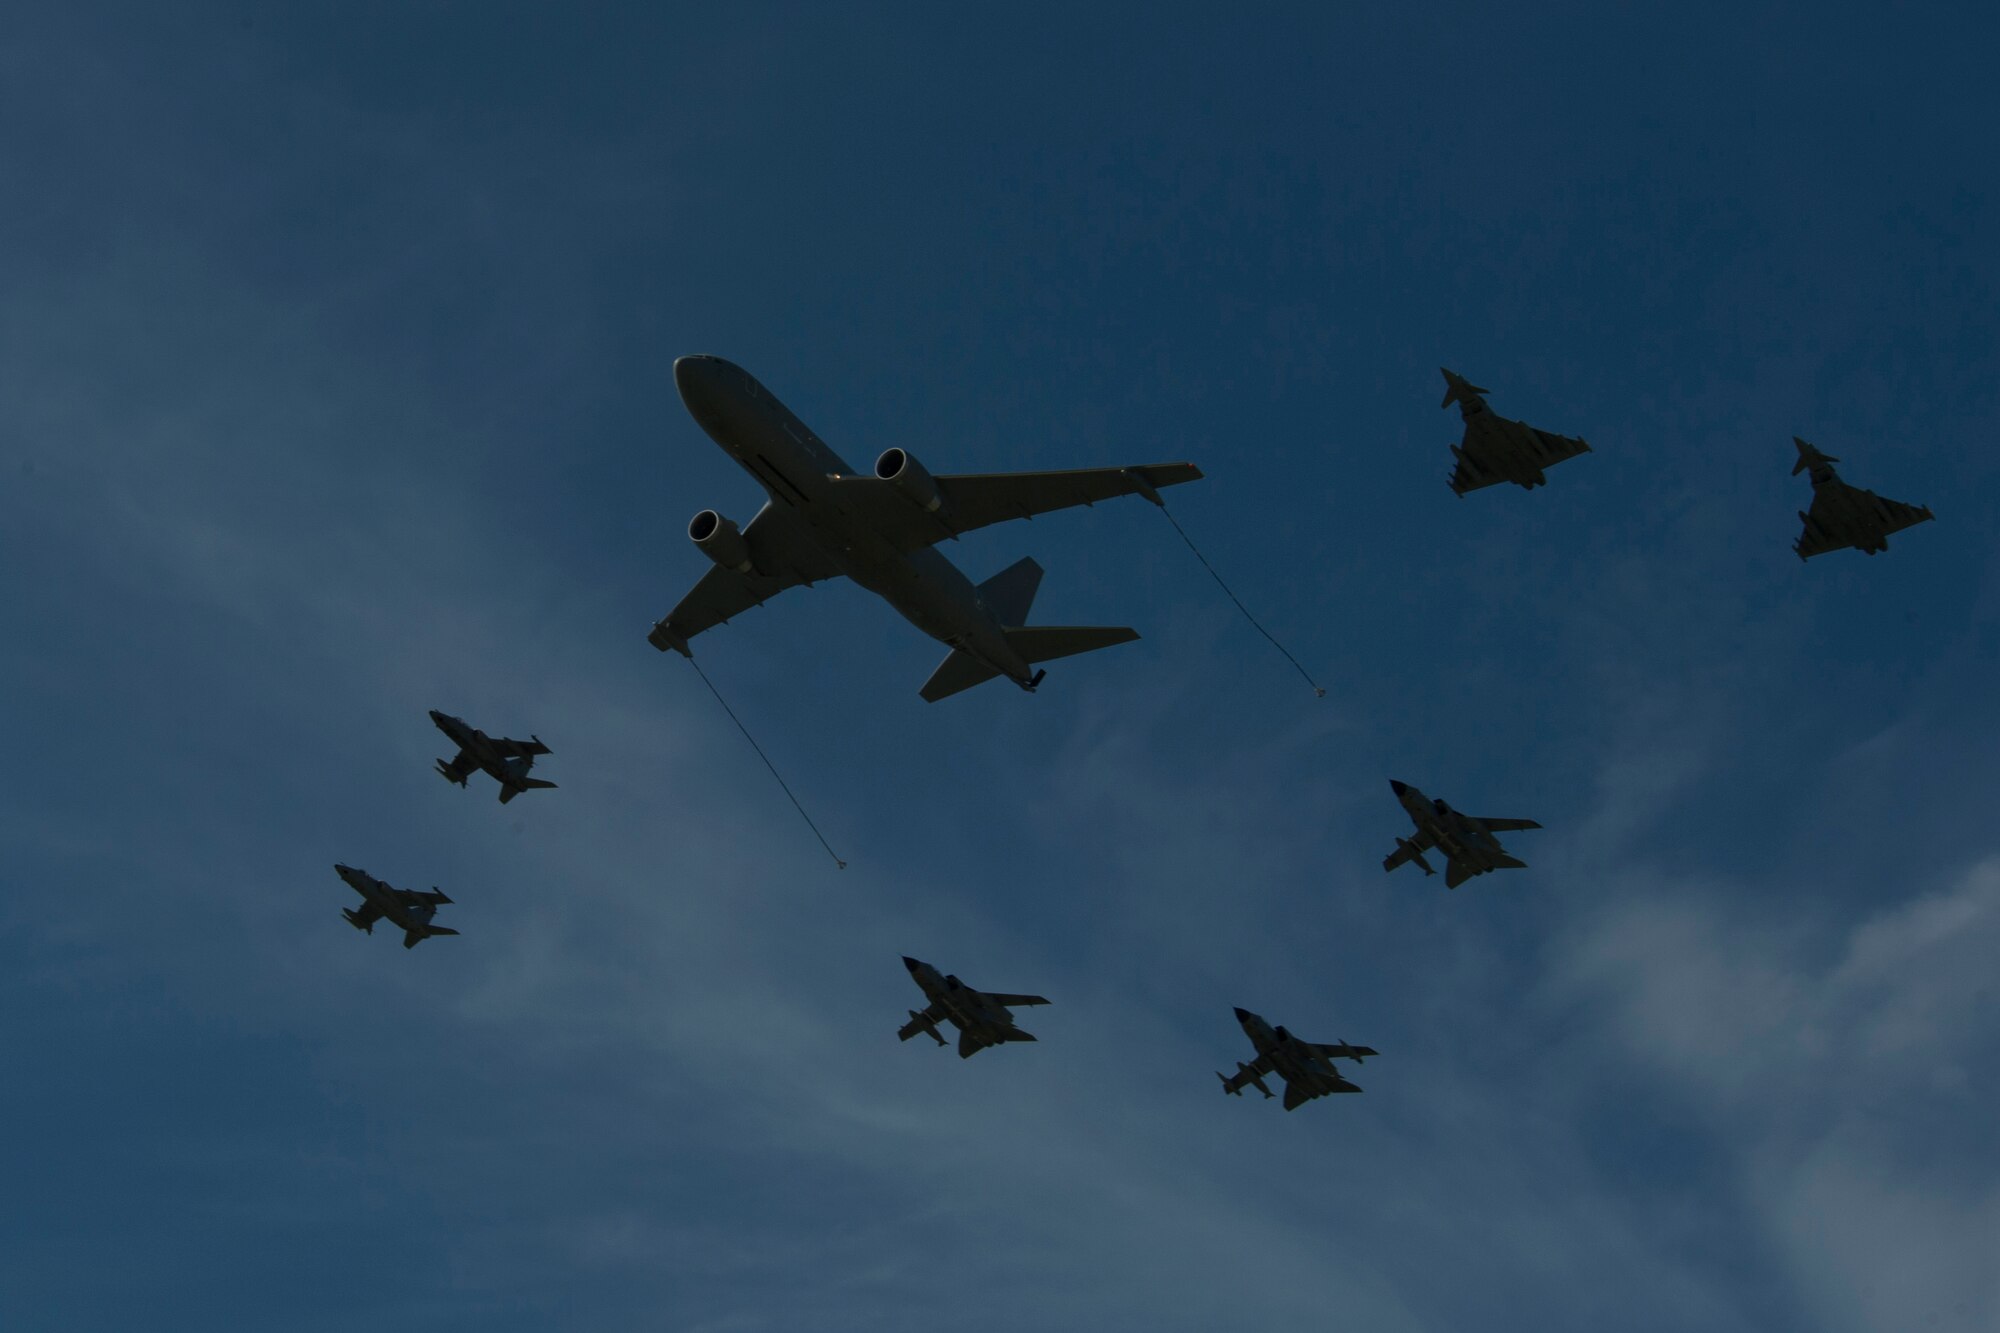 TRAPANI AIR BASE, Italy - Aircraft from multiple nations fly in formation during the Trapani Air Show at Trapani Air Base, Italy, Oct. 19, 2015. The Trapani Air Show kicked off Trident Juncture 2015, a training exercise involving more than 30 Allied and Partner Nations taking place throughout Italy, Portugal, Spain, the Atlantic Ocean, the Mediterranean Sea, Canada, Norway, Germany, Belgium and the Netherlands. (U.S. Air Force photo by Airman 1st Class Luke Kitterman/Released)